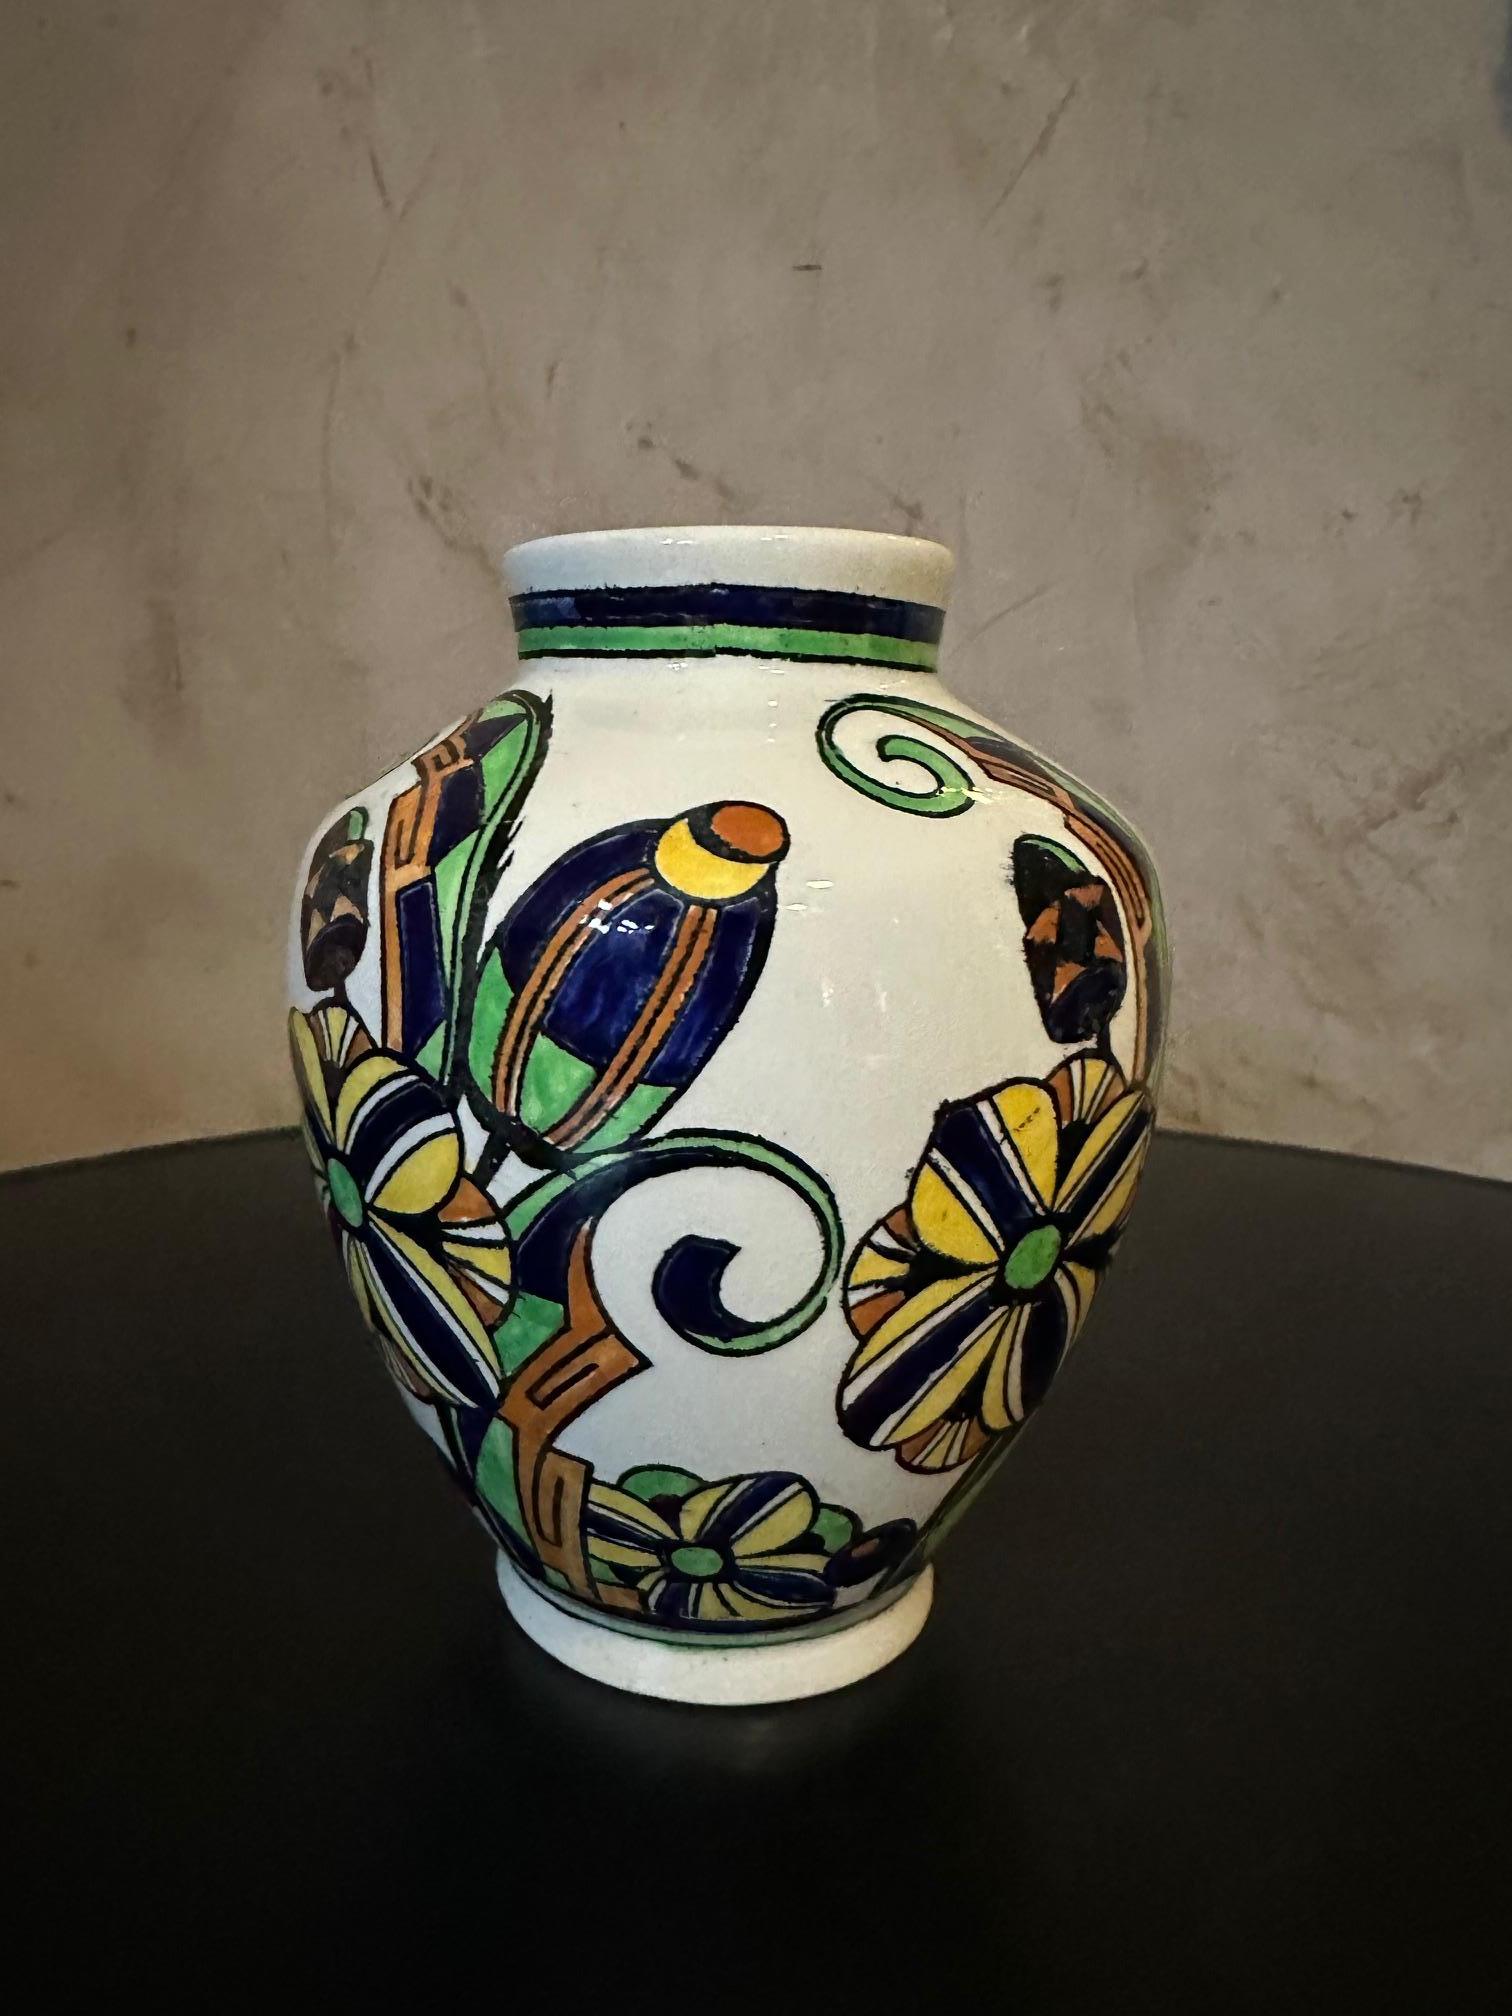 Very nice small vase in fine polychrome earthenware from the 1930s made by Boch la louviere or Boch Freres (stamp under the base). Floral decoration on white background. Very good quality and good condition.
​